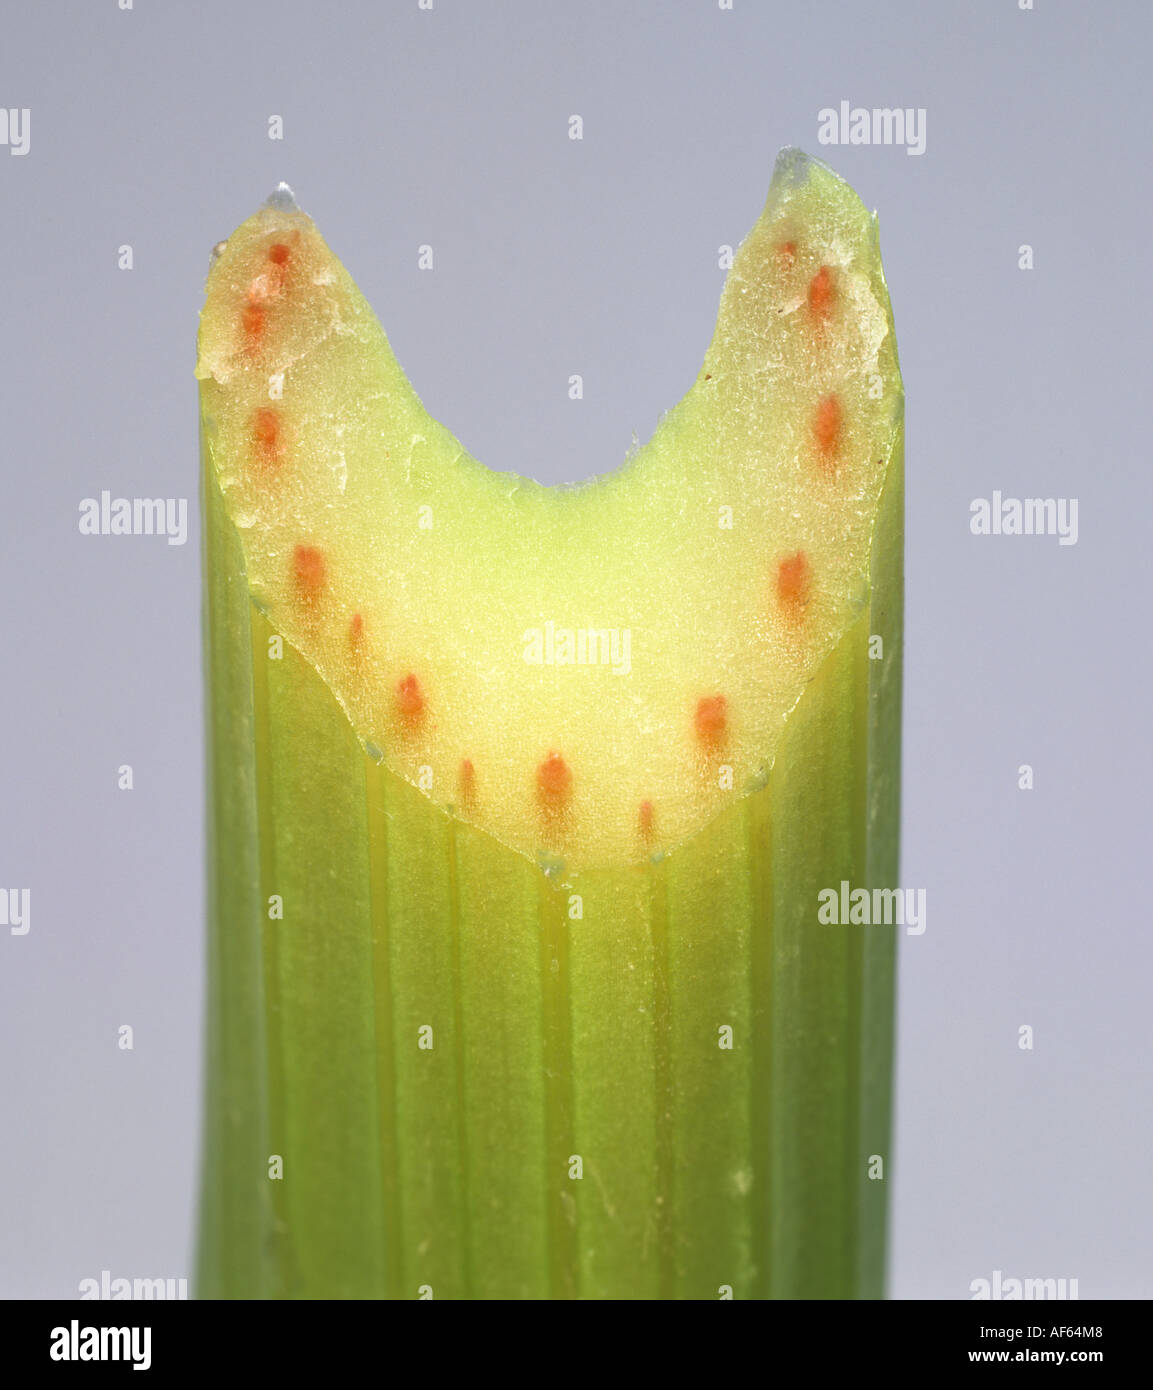 Section through a celery stem to show red dye taken up through the vascular bundles Stock Photo